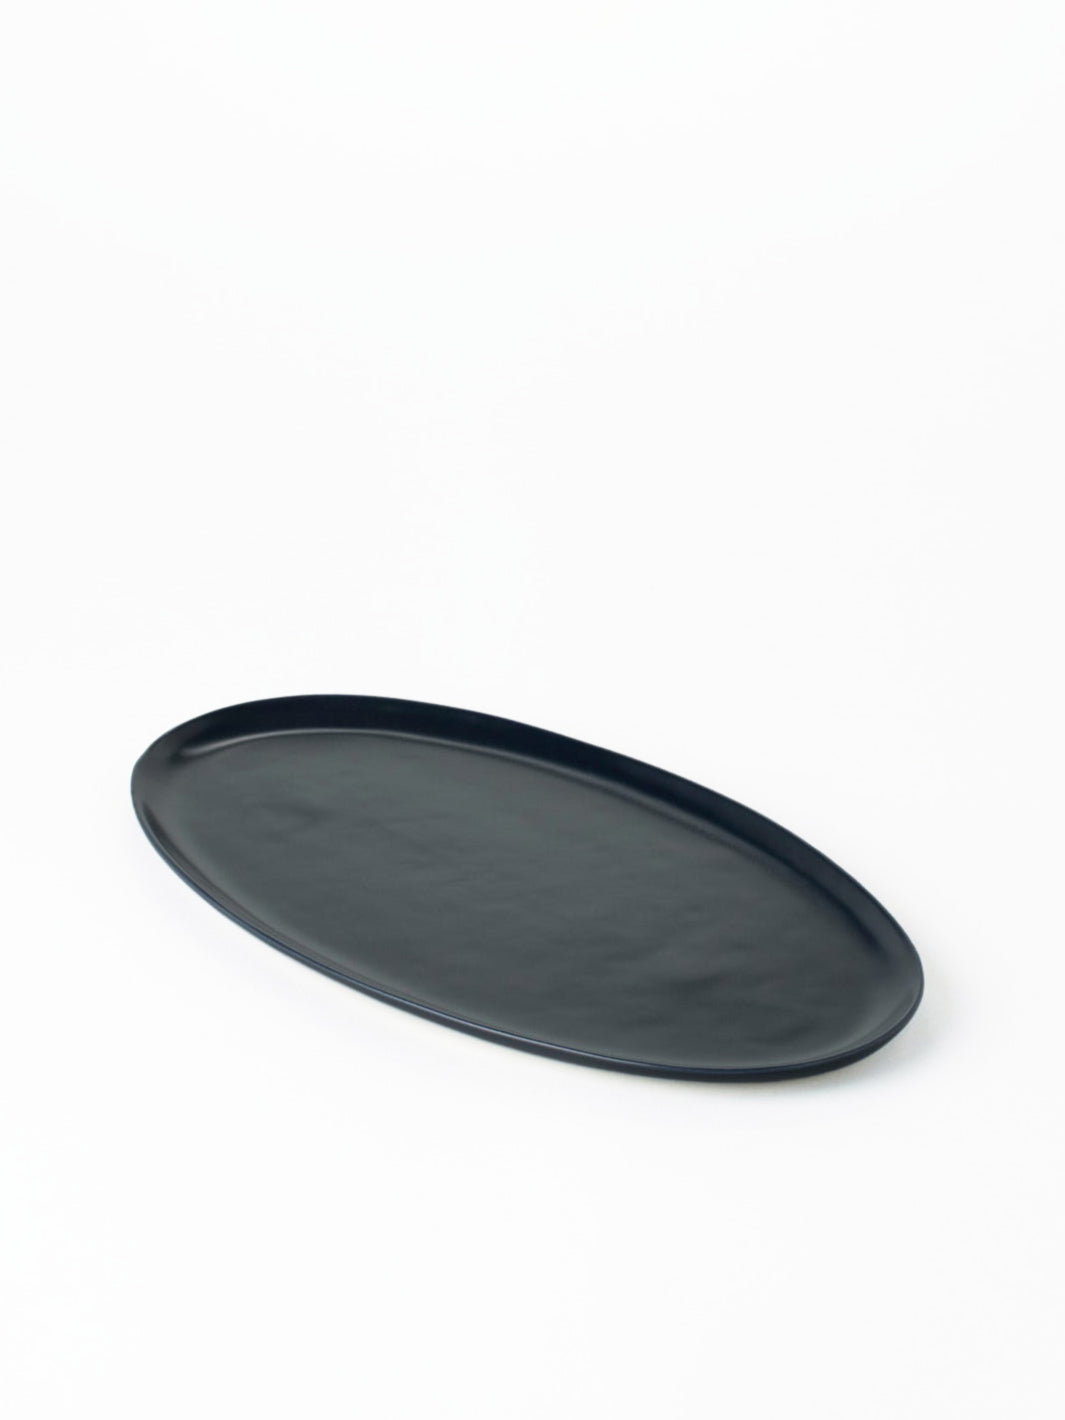 Serving Tray, Oval